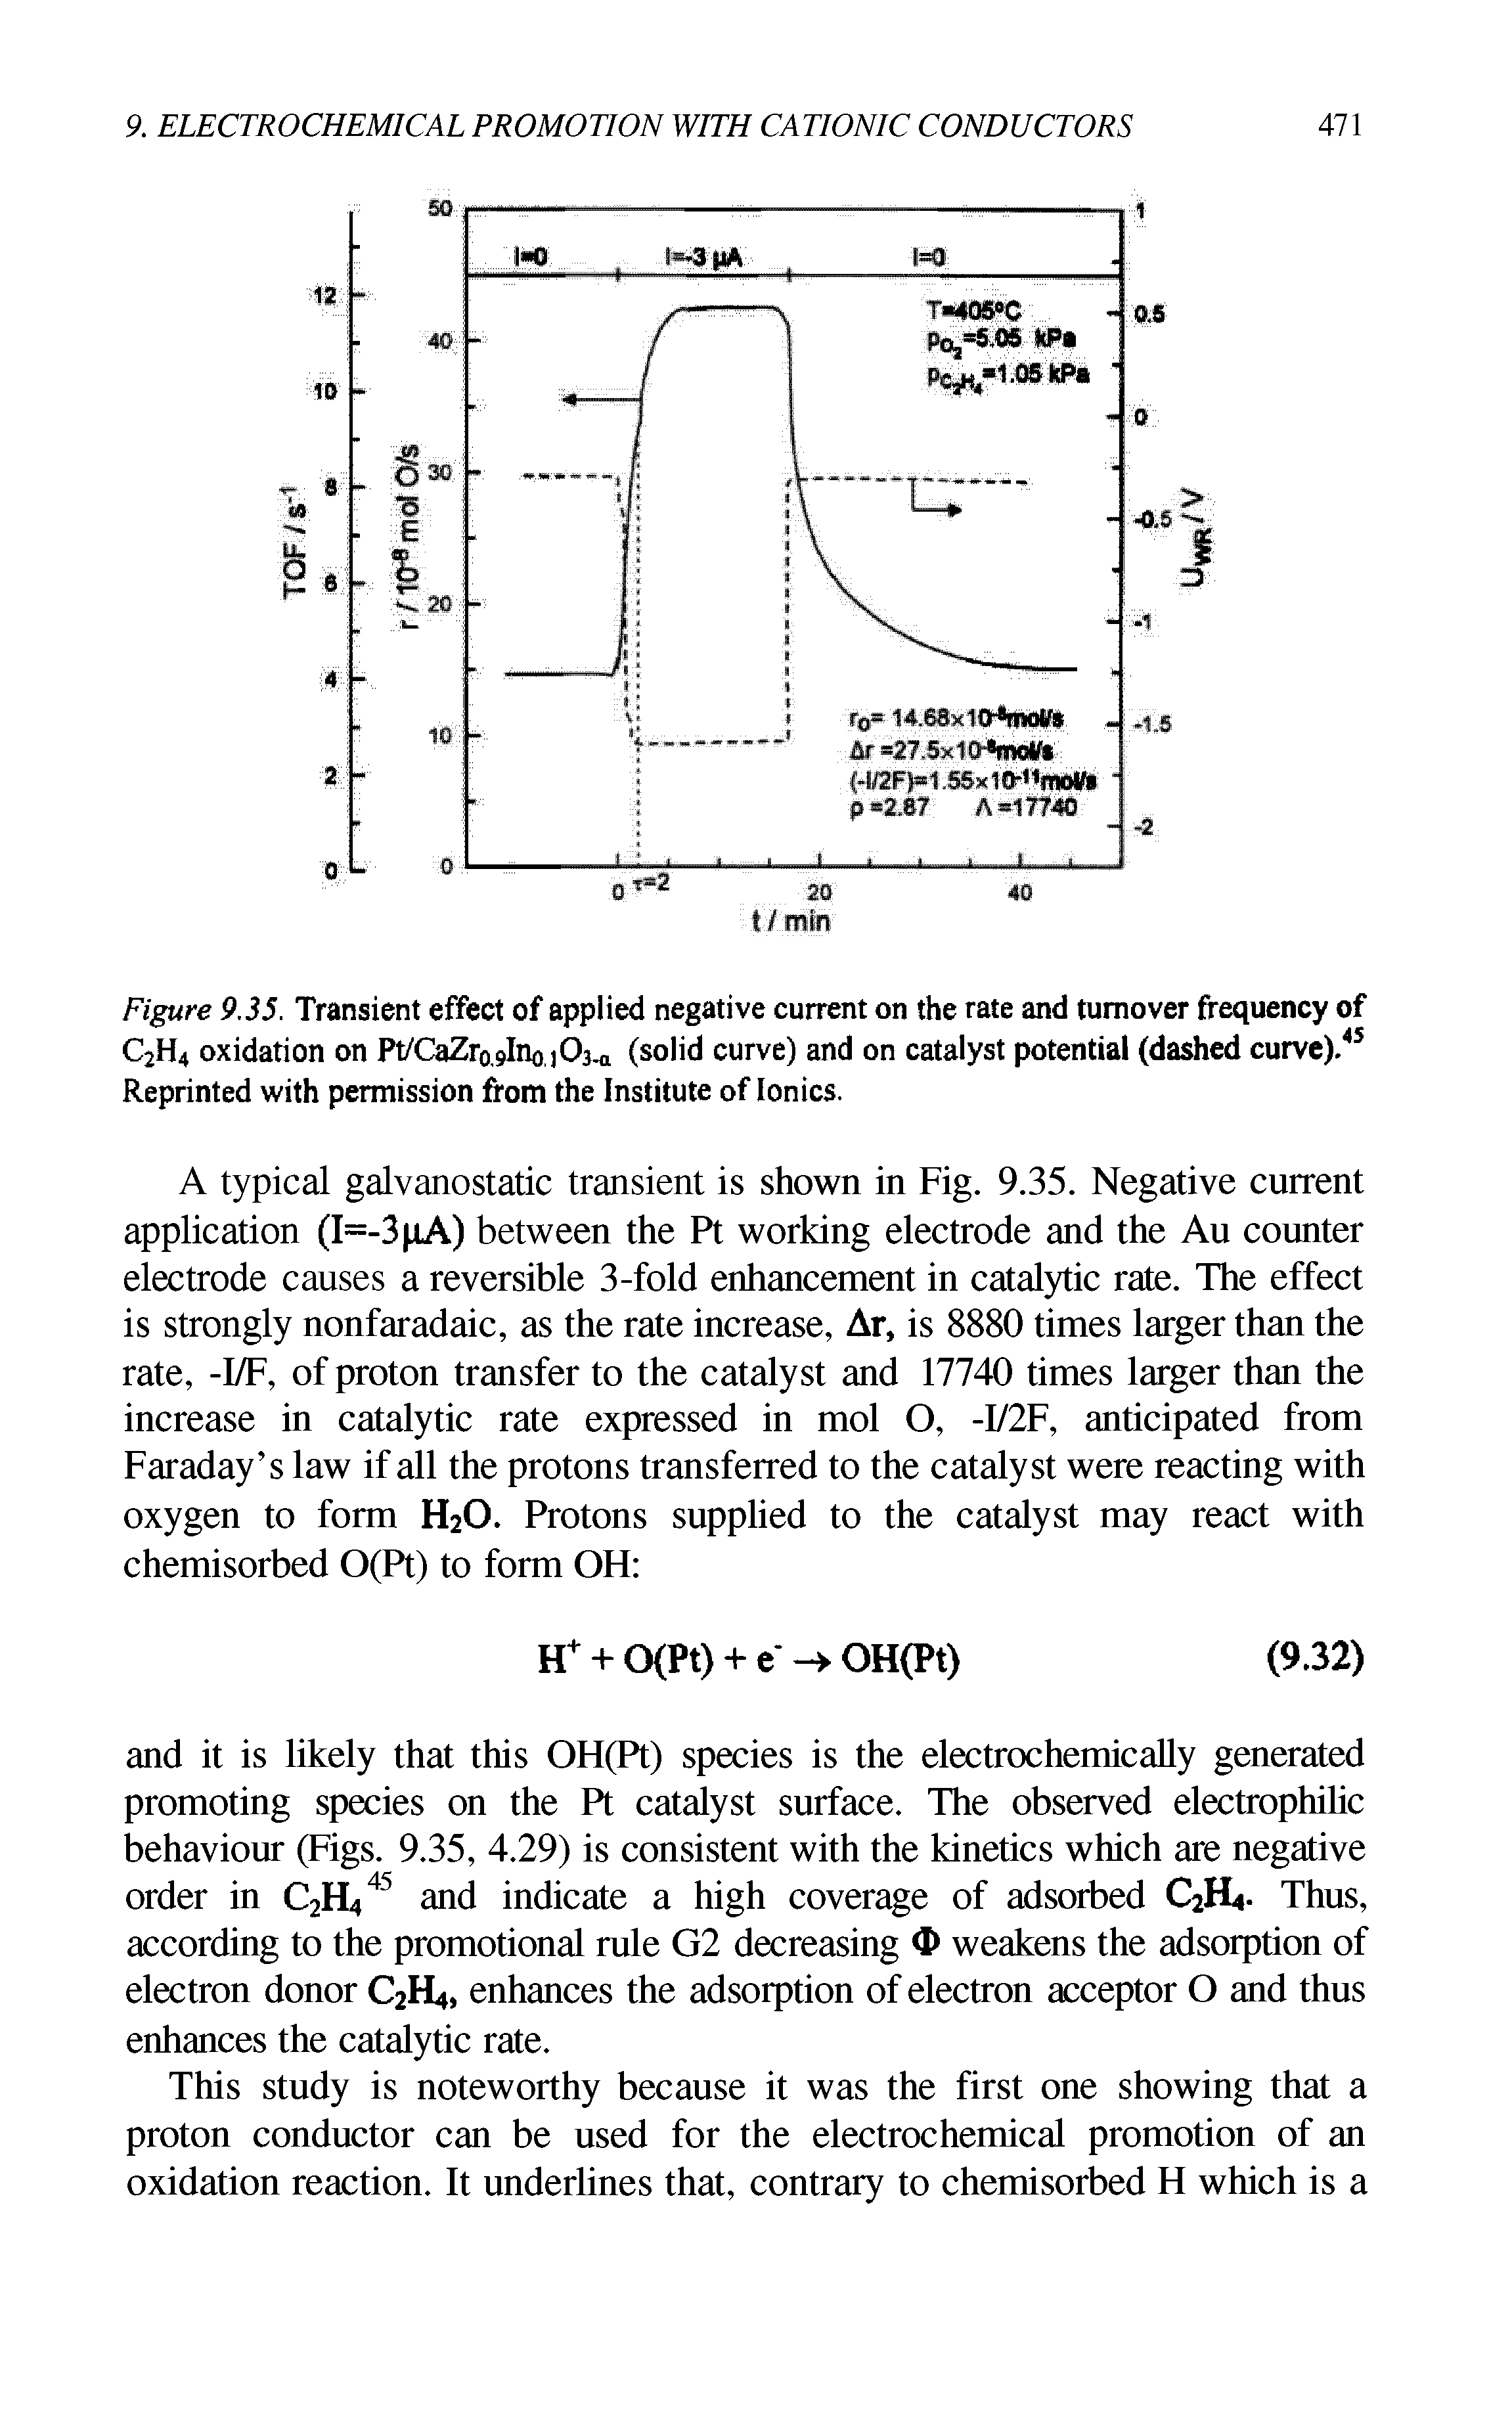 Figure 9.35. Transient effect of applied negative current on the rate and turnover frequency of C2H4 oxidation on Pt/CaZro,9Ino ]03.a (solid curve) and on catalyst potential (dashed curve).45 Reprinted with permission from the Institute of Ionics.